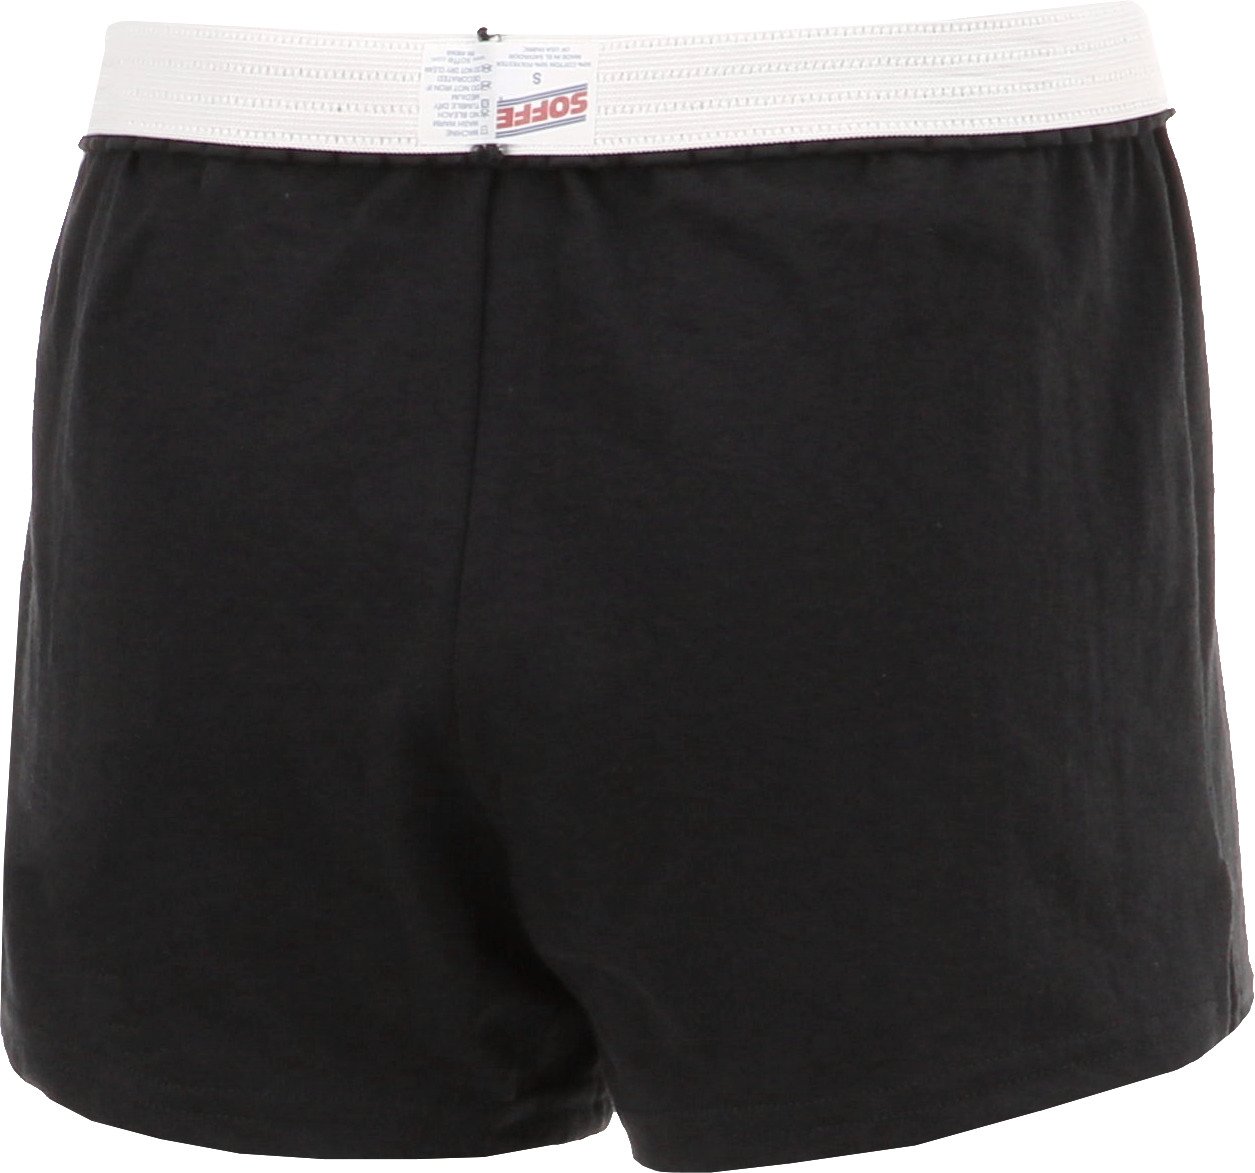 Soffe Girls Authentic Short